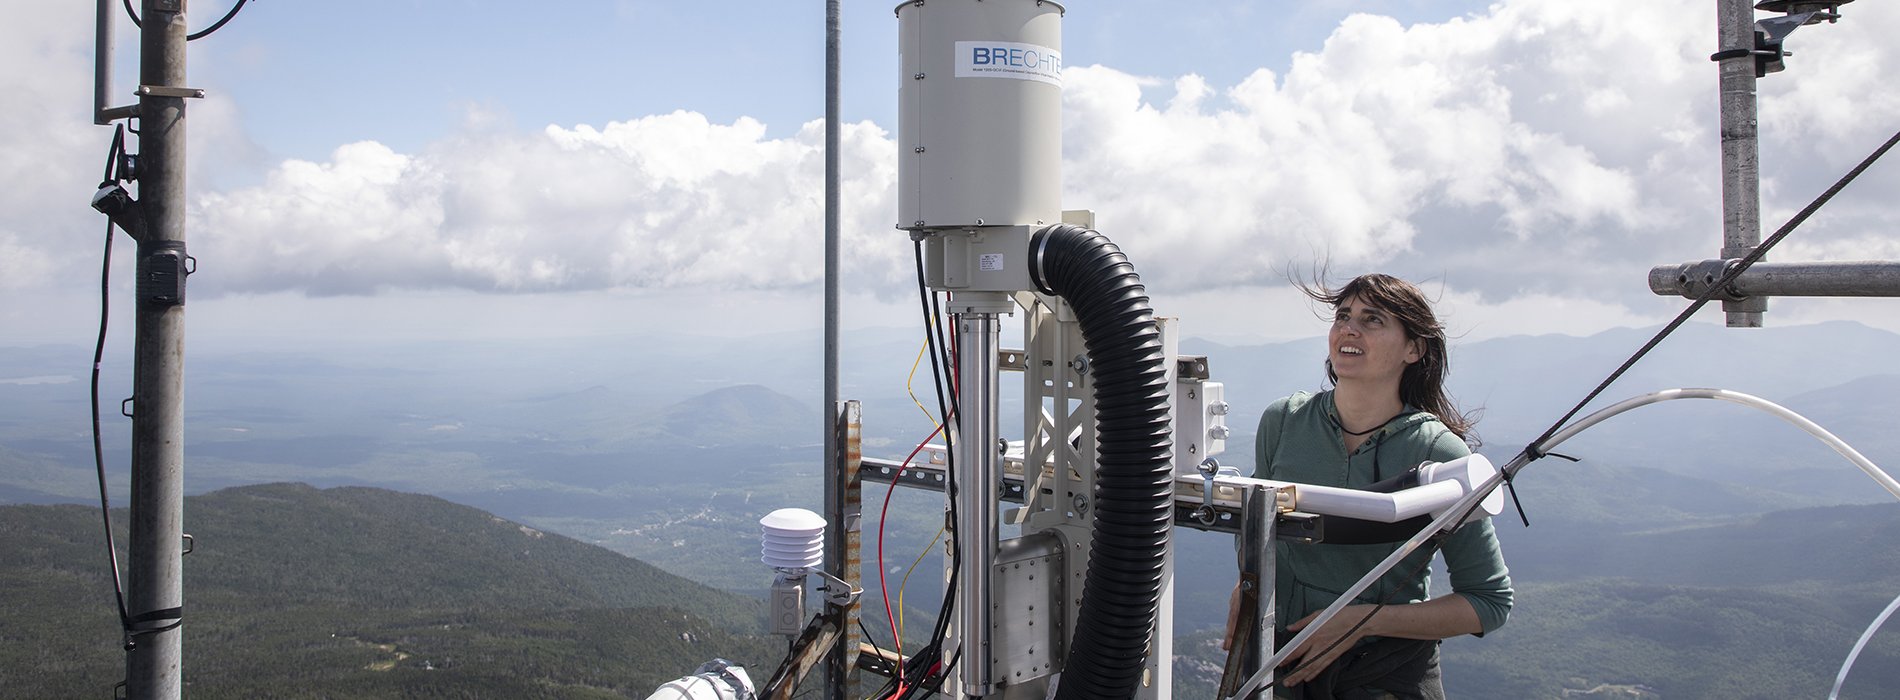 Research is conducted at the University at Albany's Atmospheric Sciences Research Center Whiteface Mountain Summit Weather Station on Tuesday, August 24, 2021. (photo by Patrick Dodson)